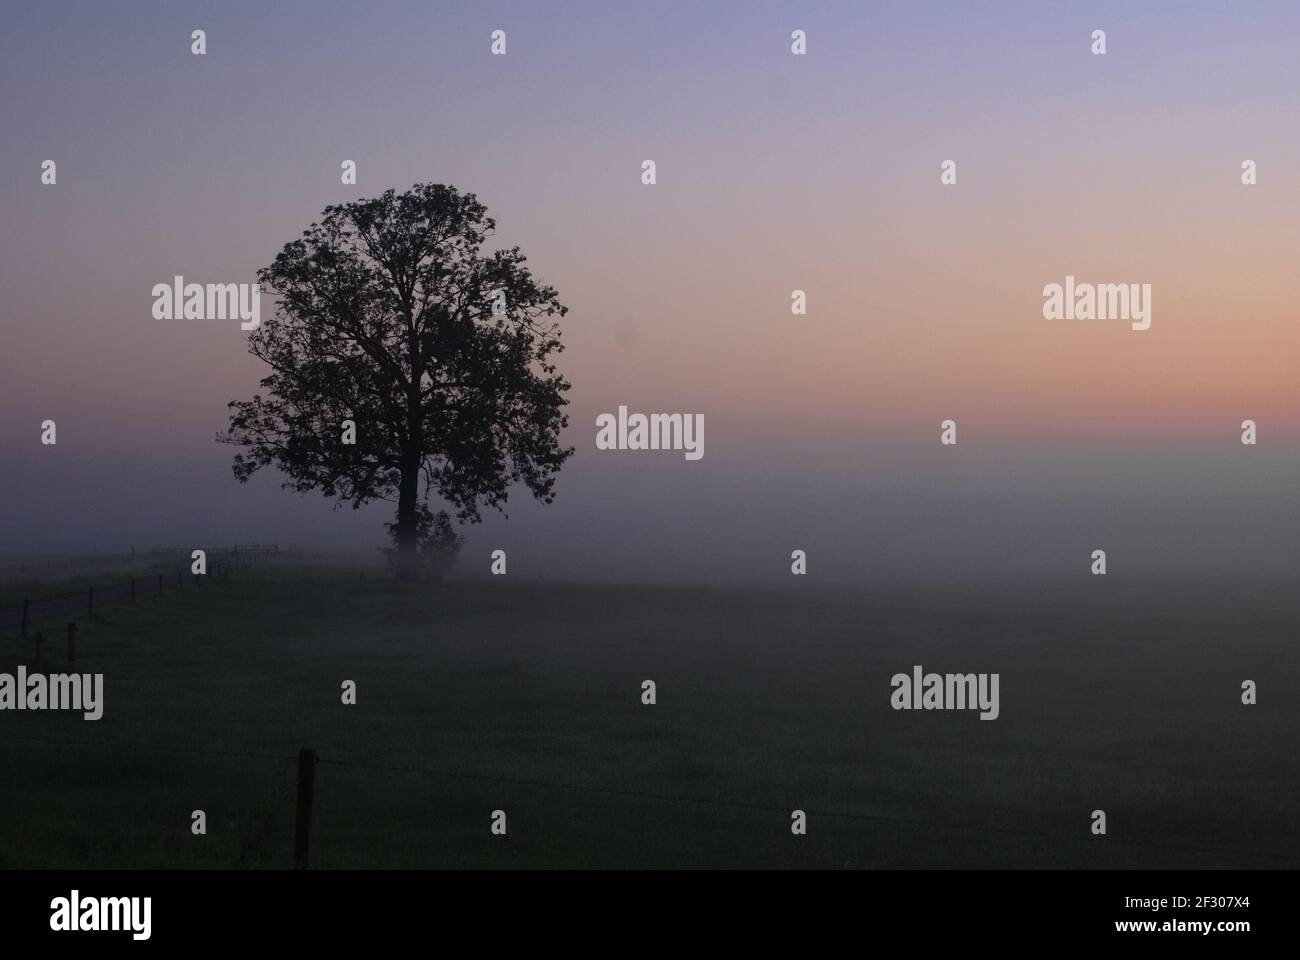 Lonely tree in a meadow during a misty sunrise Stock Photo